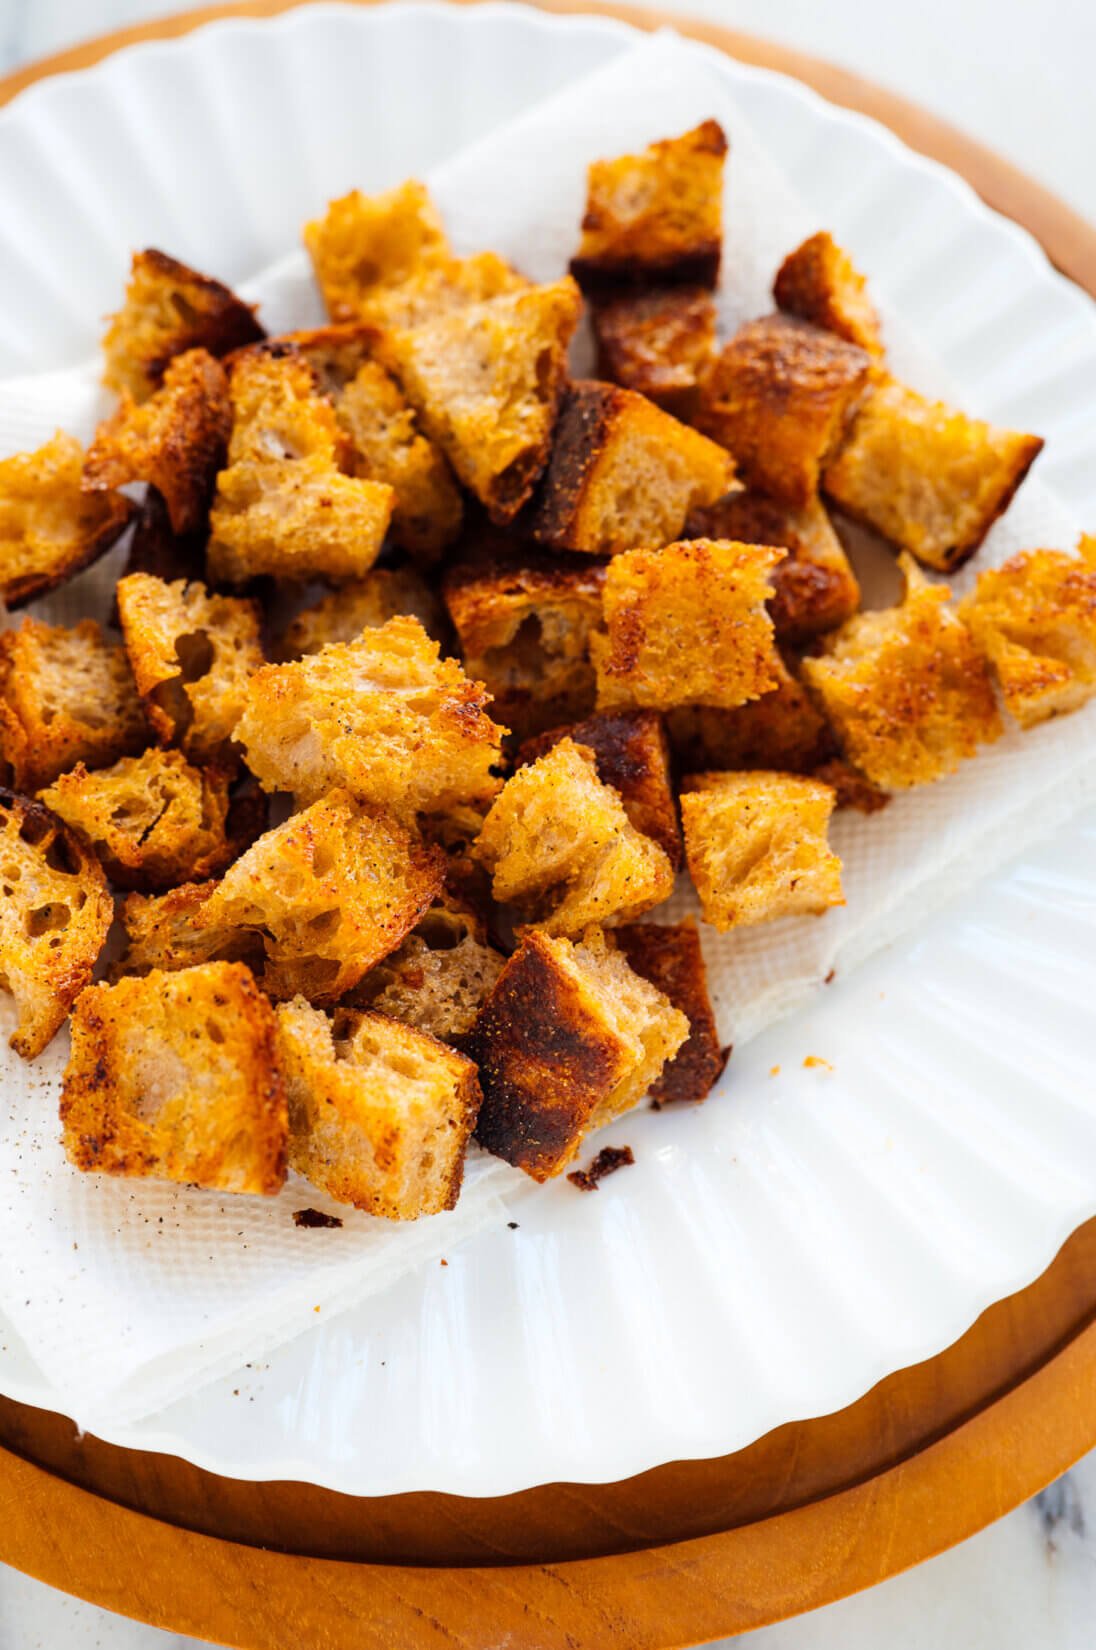 Homemade Croutons Recipe - Cookie and Kate